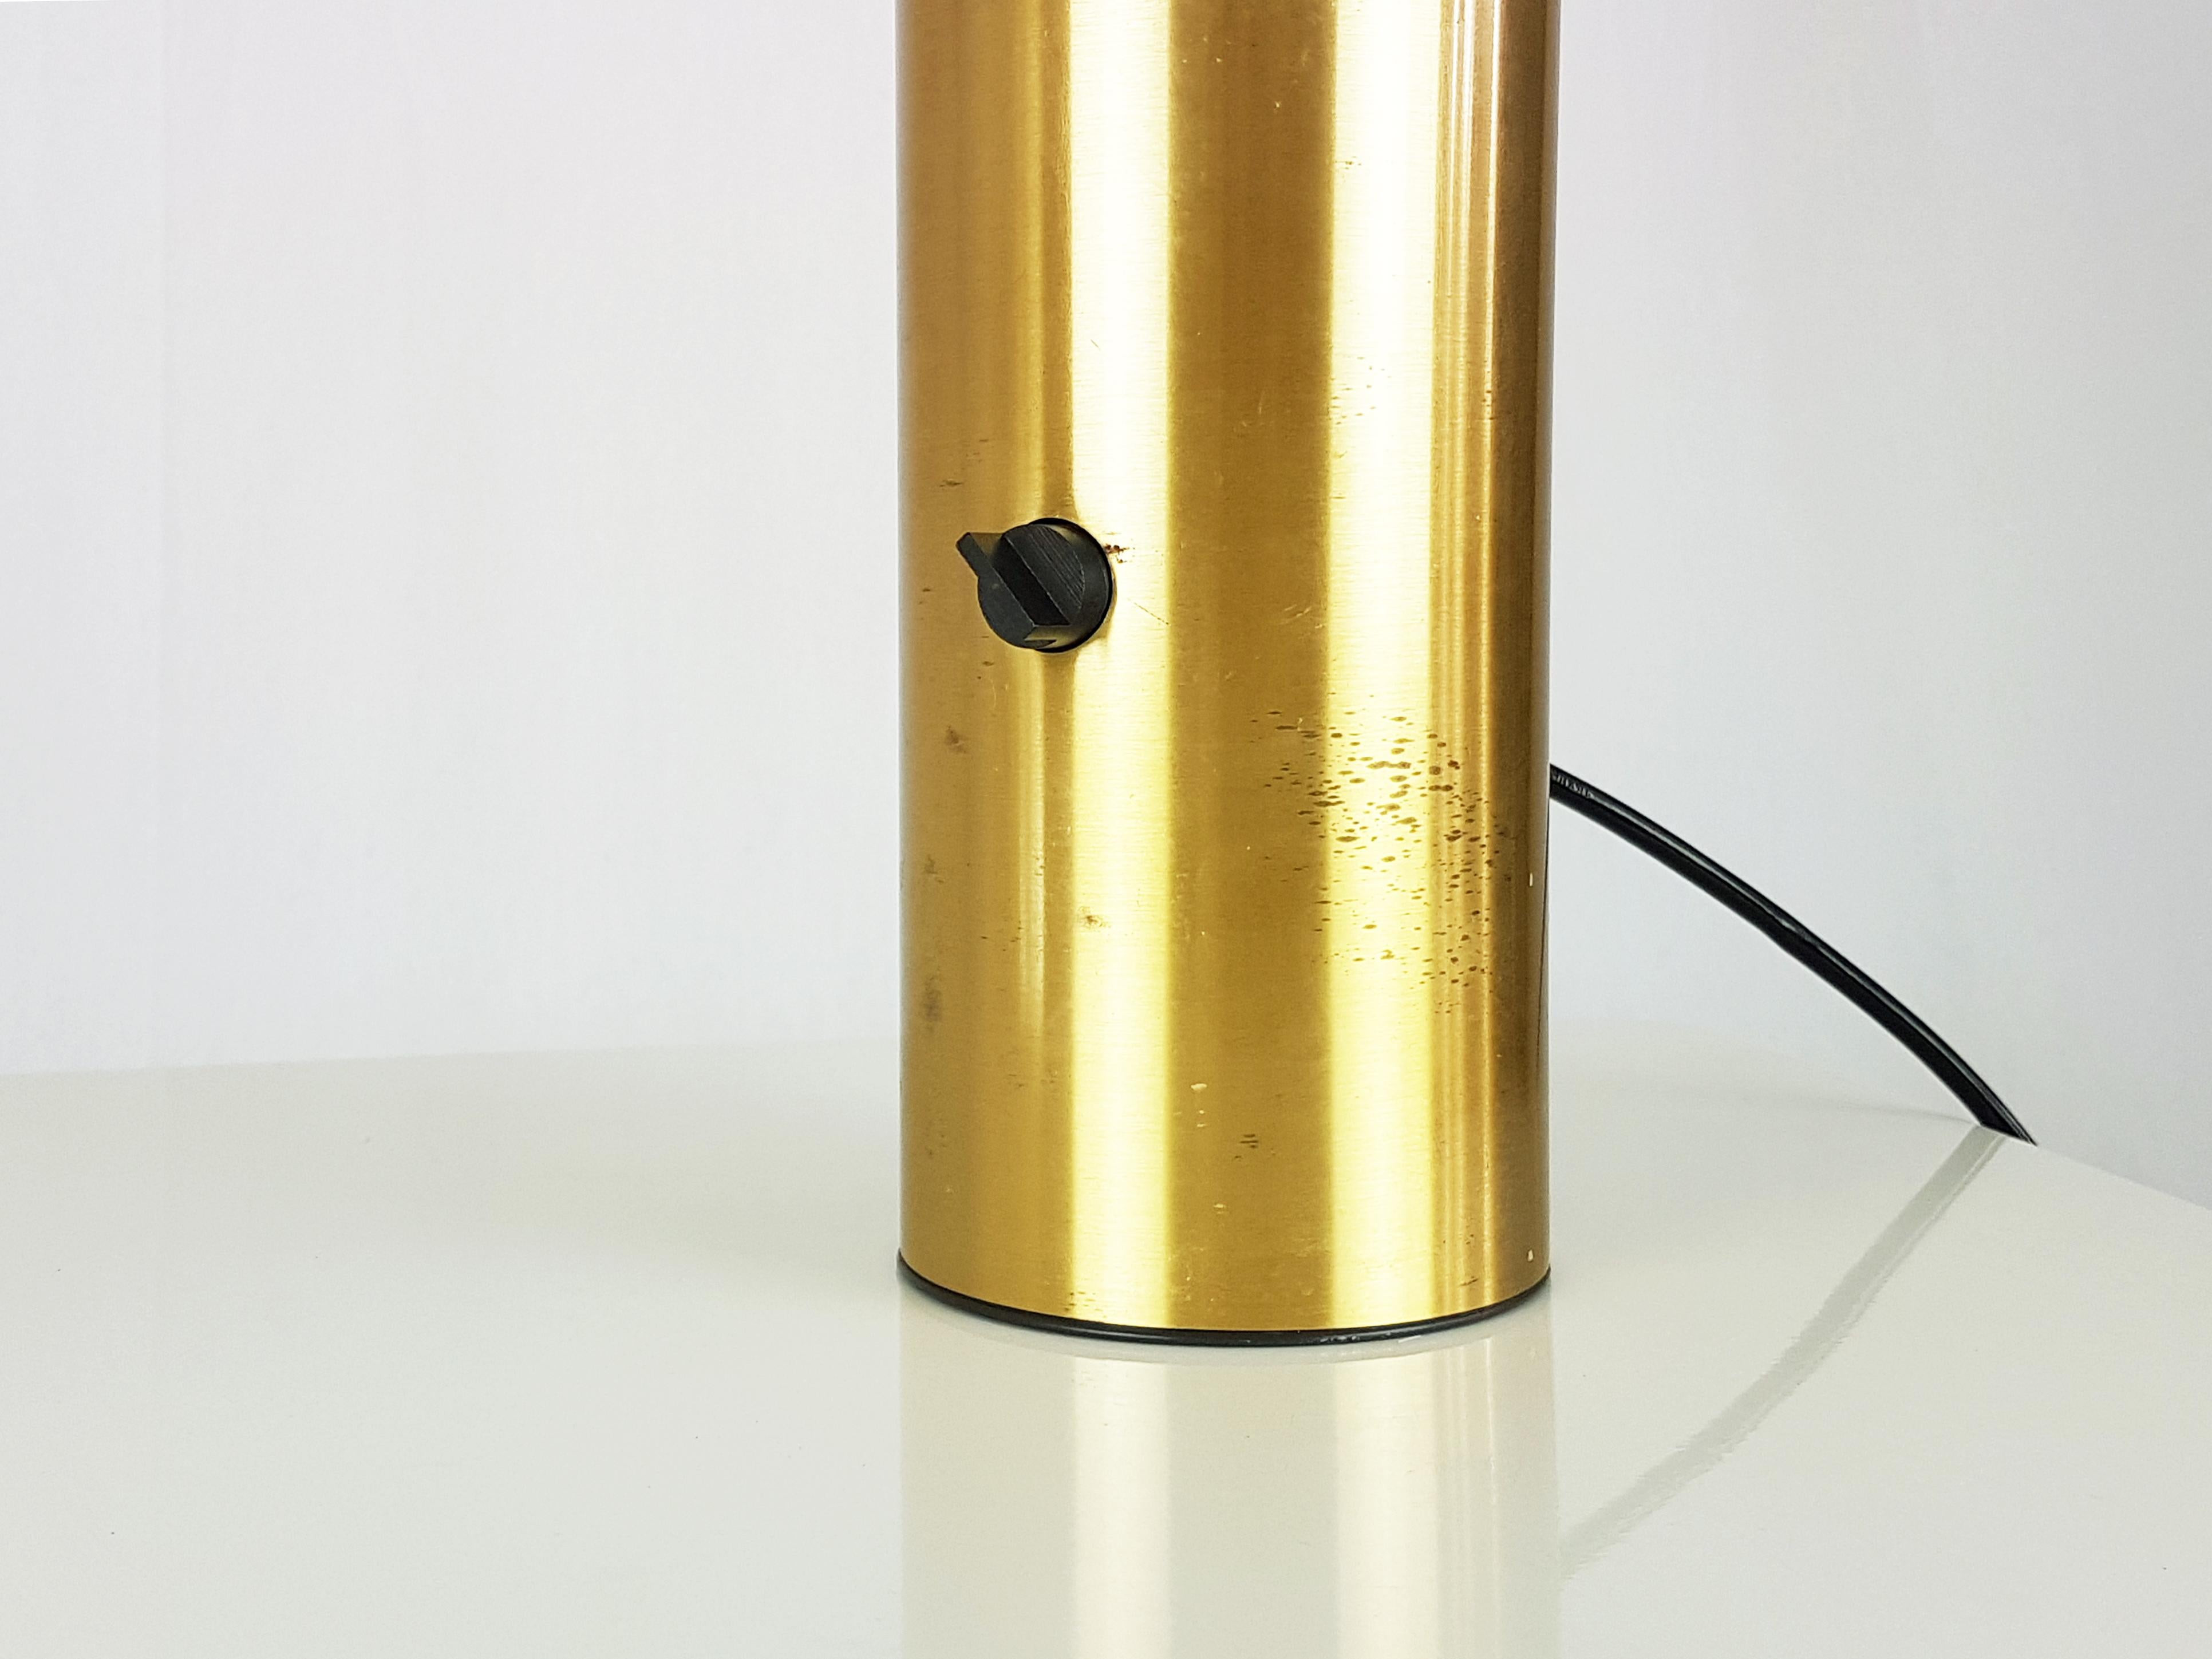 Italian Brushed Brass Vaga Table Lamp by Franco Mirenzi for Valenti, 1978 For Sale